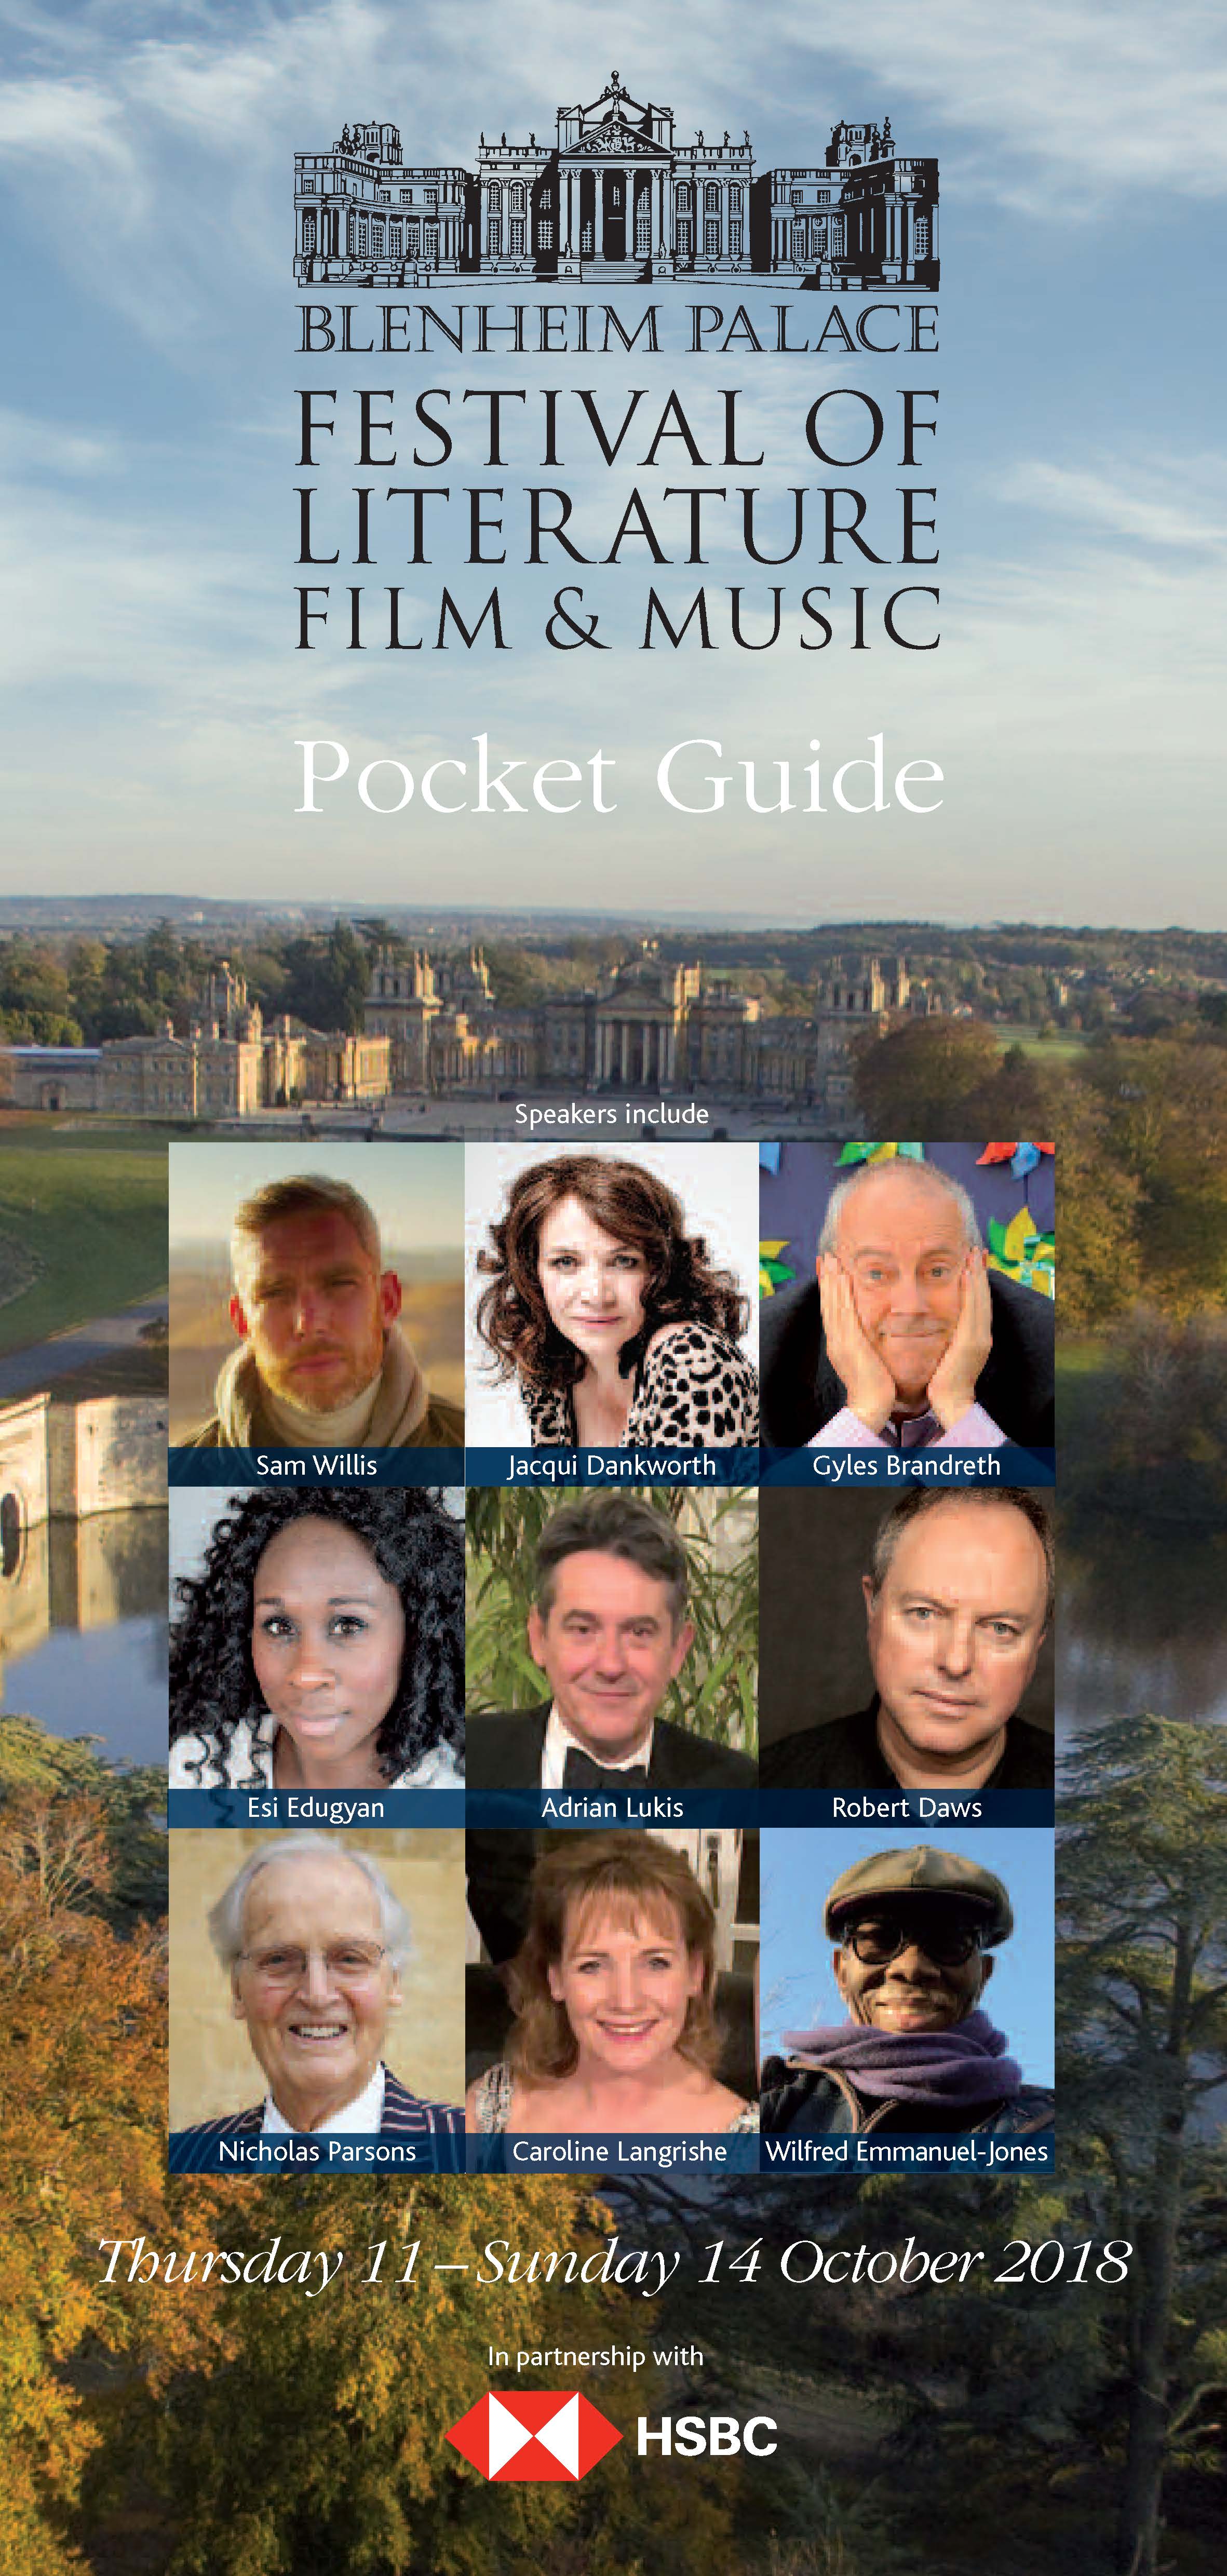 Blenheim Palace Festival of Literature, Film and Music 2018 pocket guide